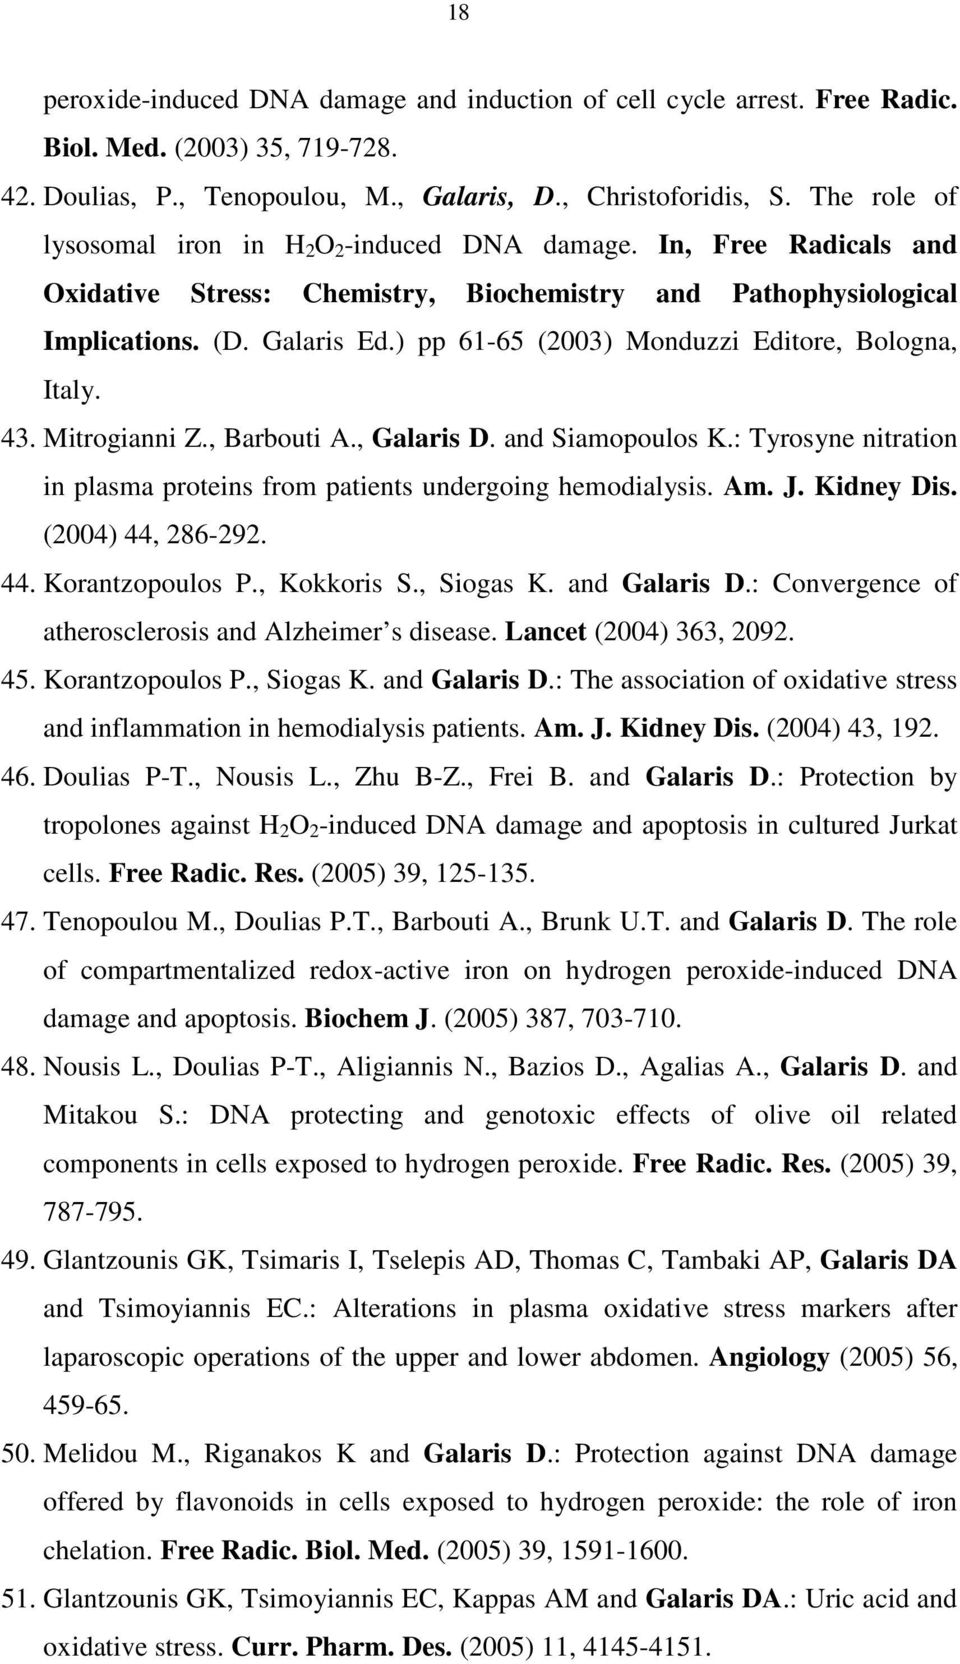 ) pp 61-65 (2003) Monduzzi Editore, Bologna, Italy. 43. Mitrogianni Z., Barbouti A., Galaris D. and Siamopoulos K.: Tyrosyne nitration in plasma proteins from patients undergoing hemodialysis. Am. J.